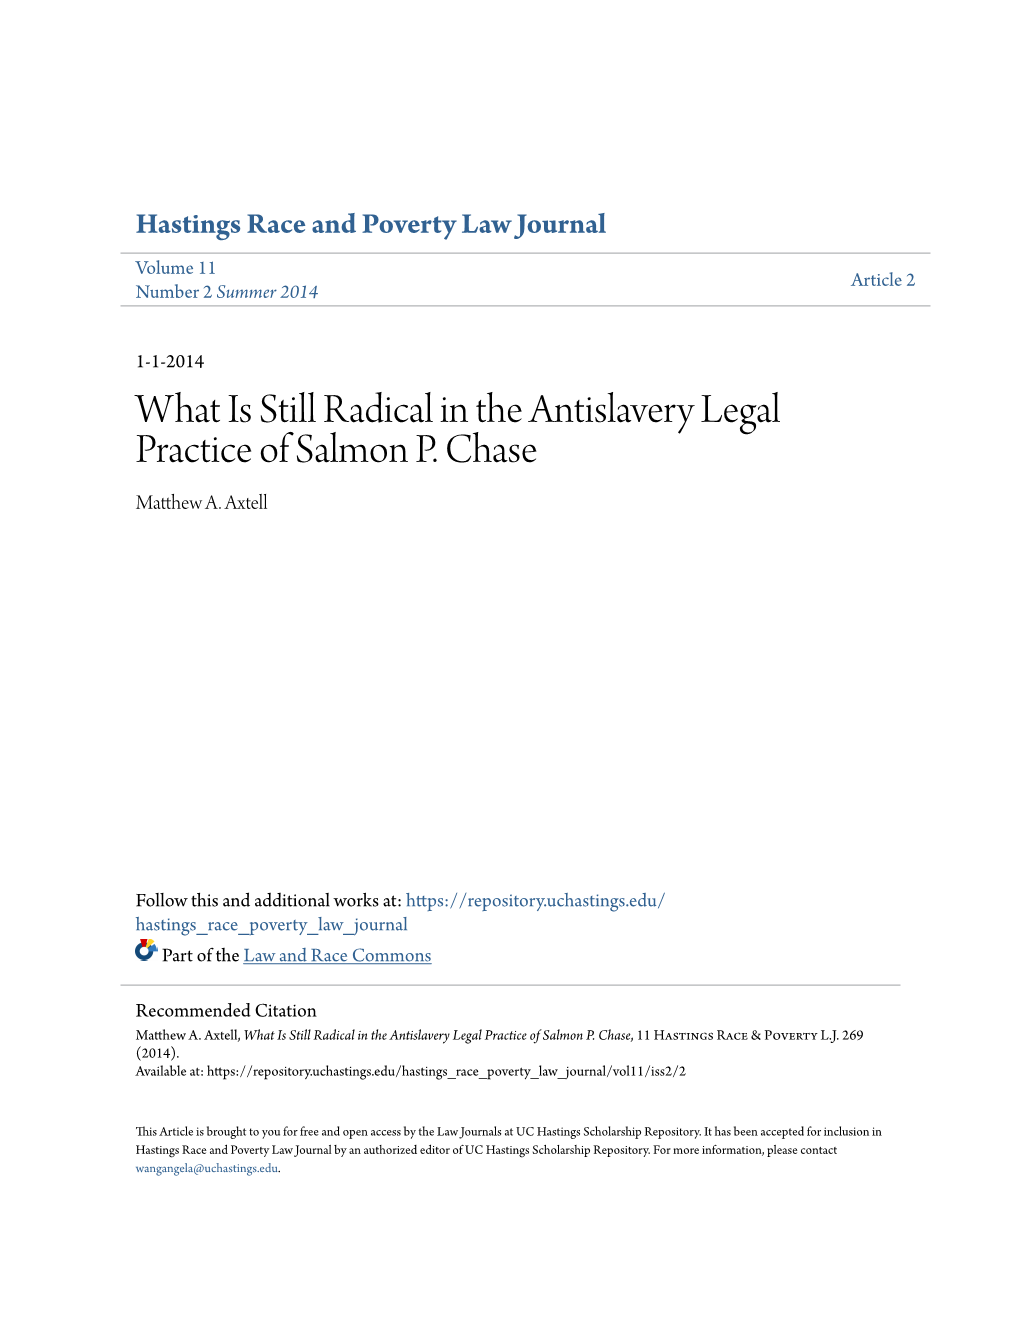 What Is Still Radical in the Antislavery Legal Practice of Salmon P. Chase Matthew A